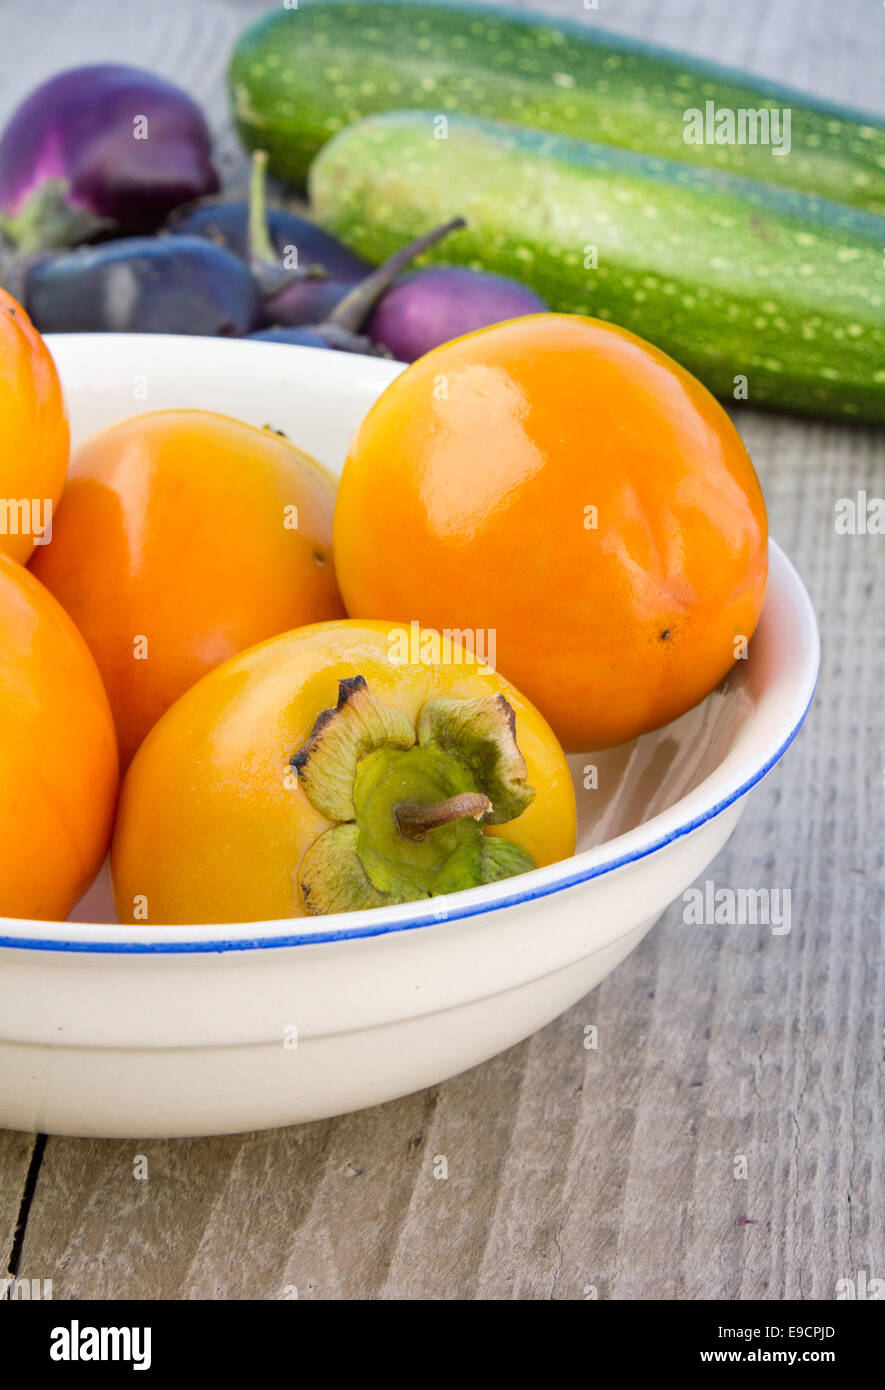 bowl with sharon fruits, courgettes, eggplant Stock Photo